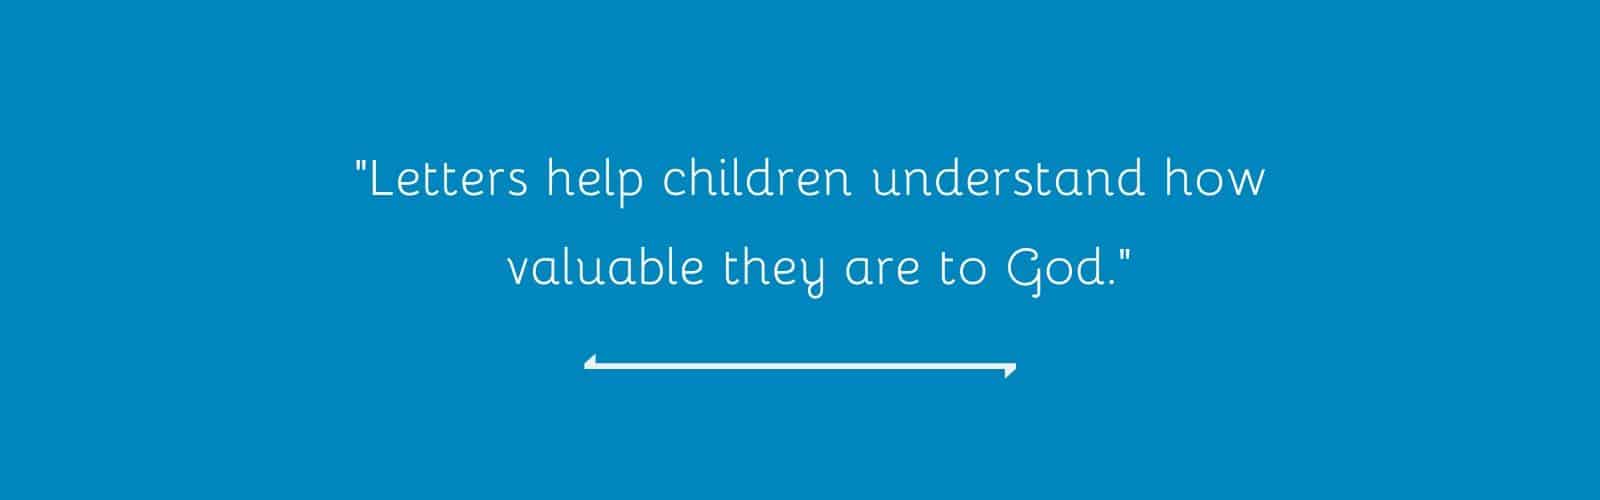 "Letters help children understand how valuable they are to God."